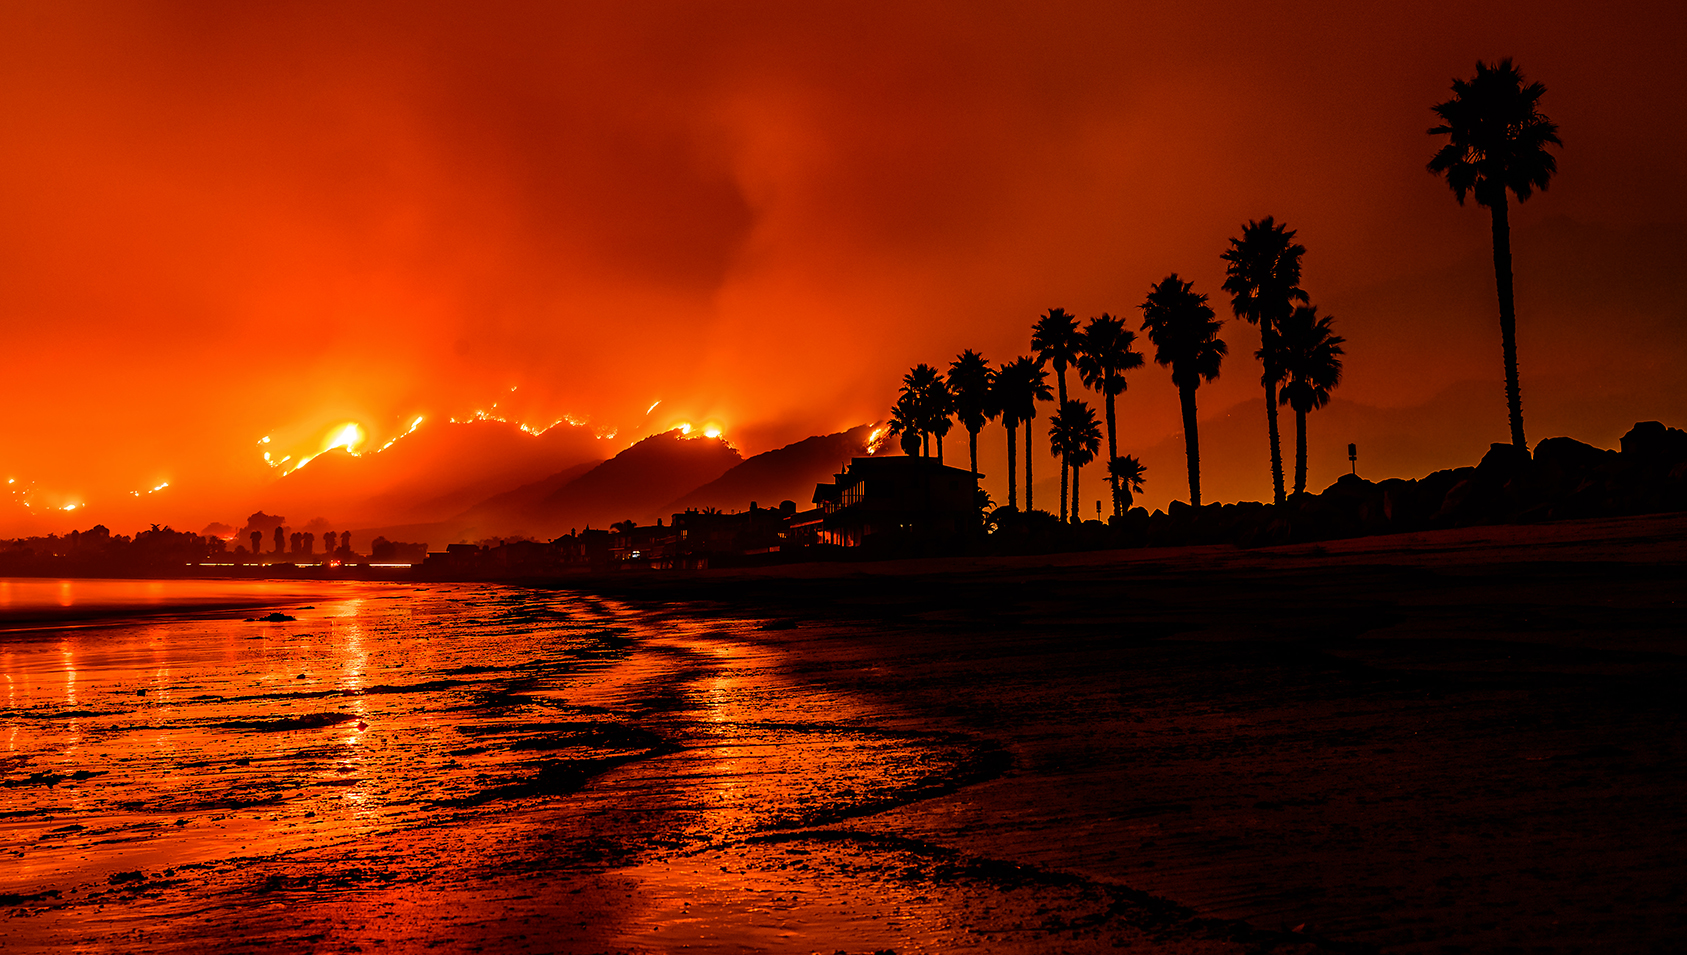 View of the Thomas Fire coloring the sky read over the beach in Santa Barbara